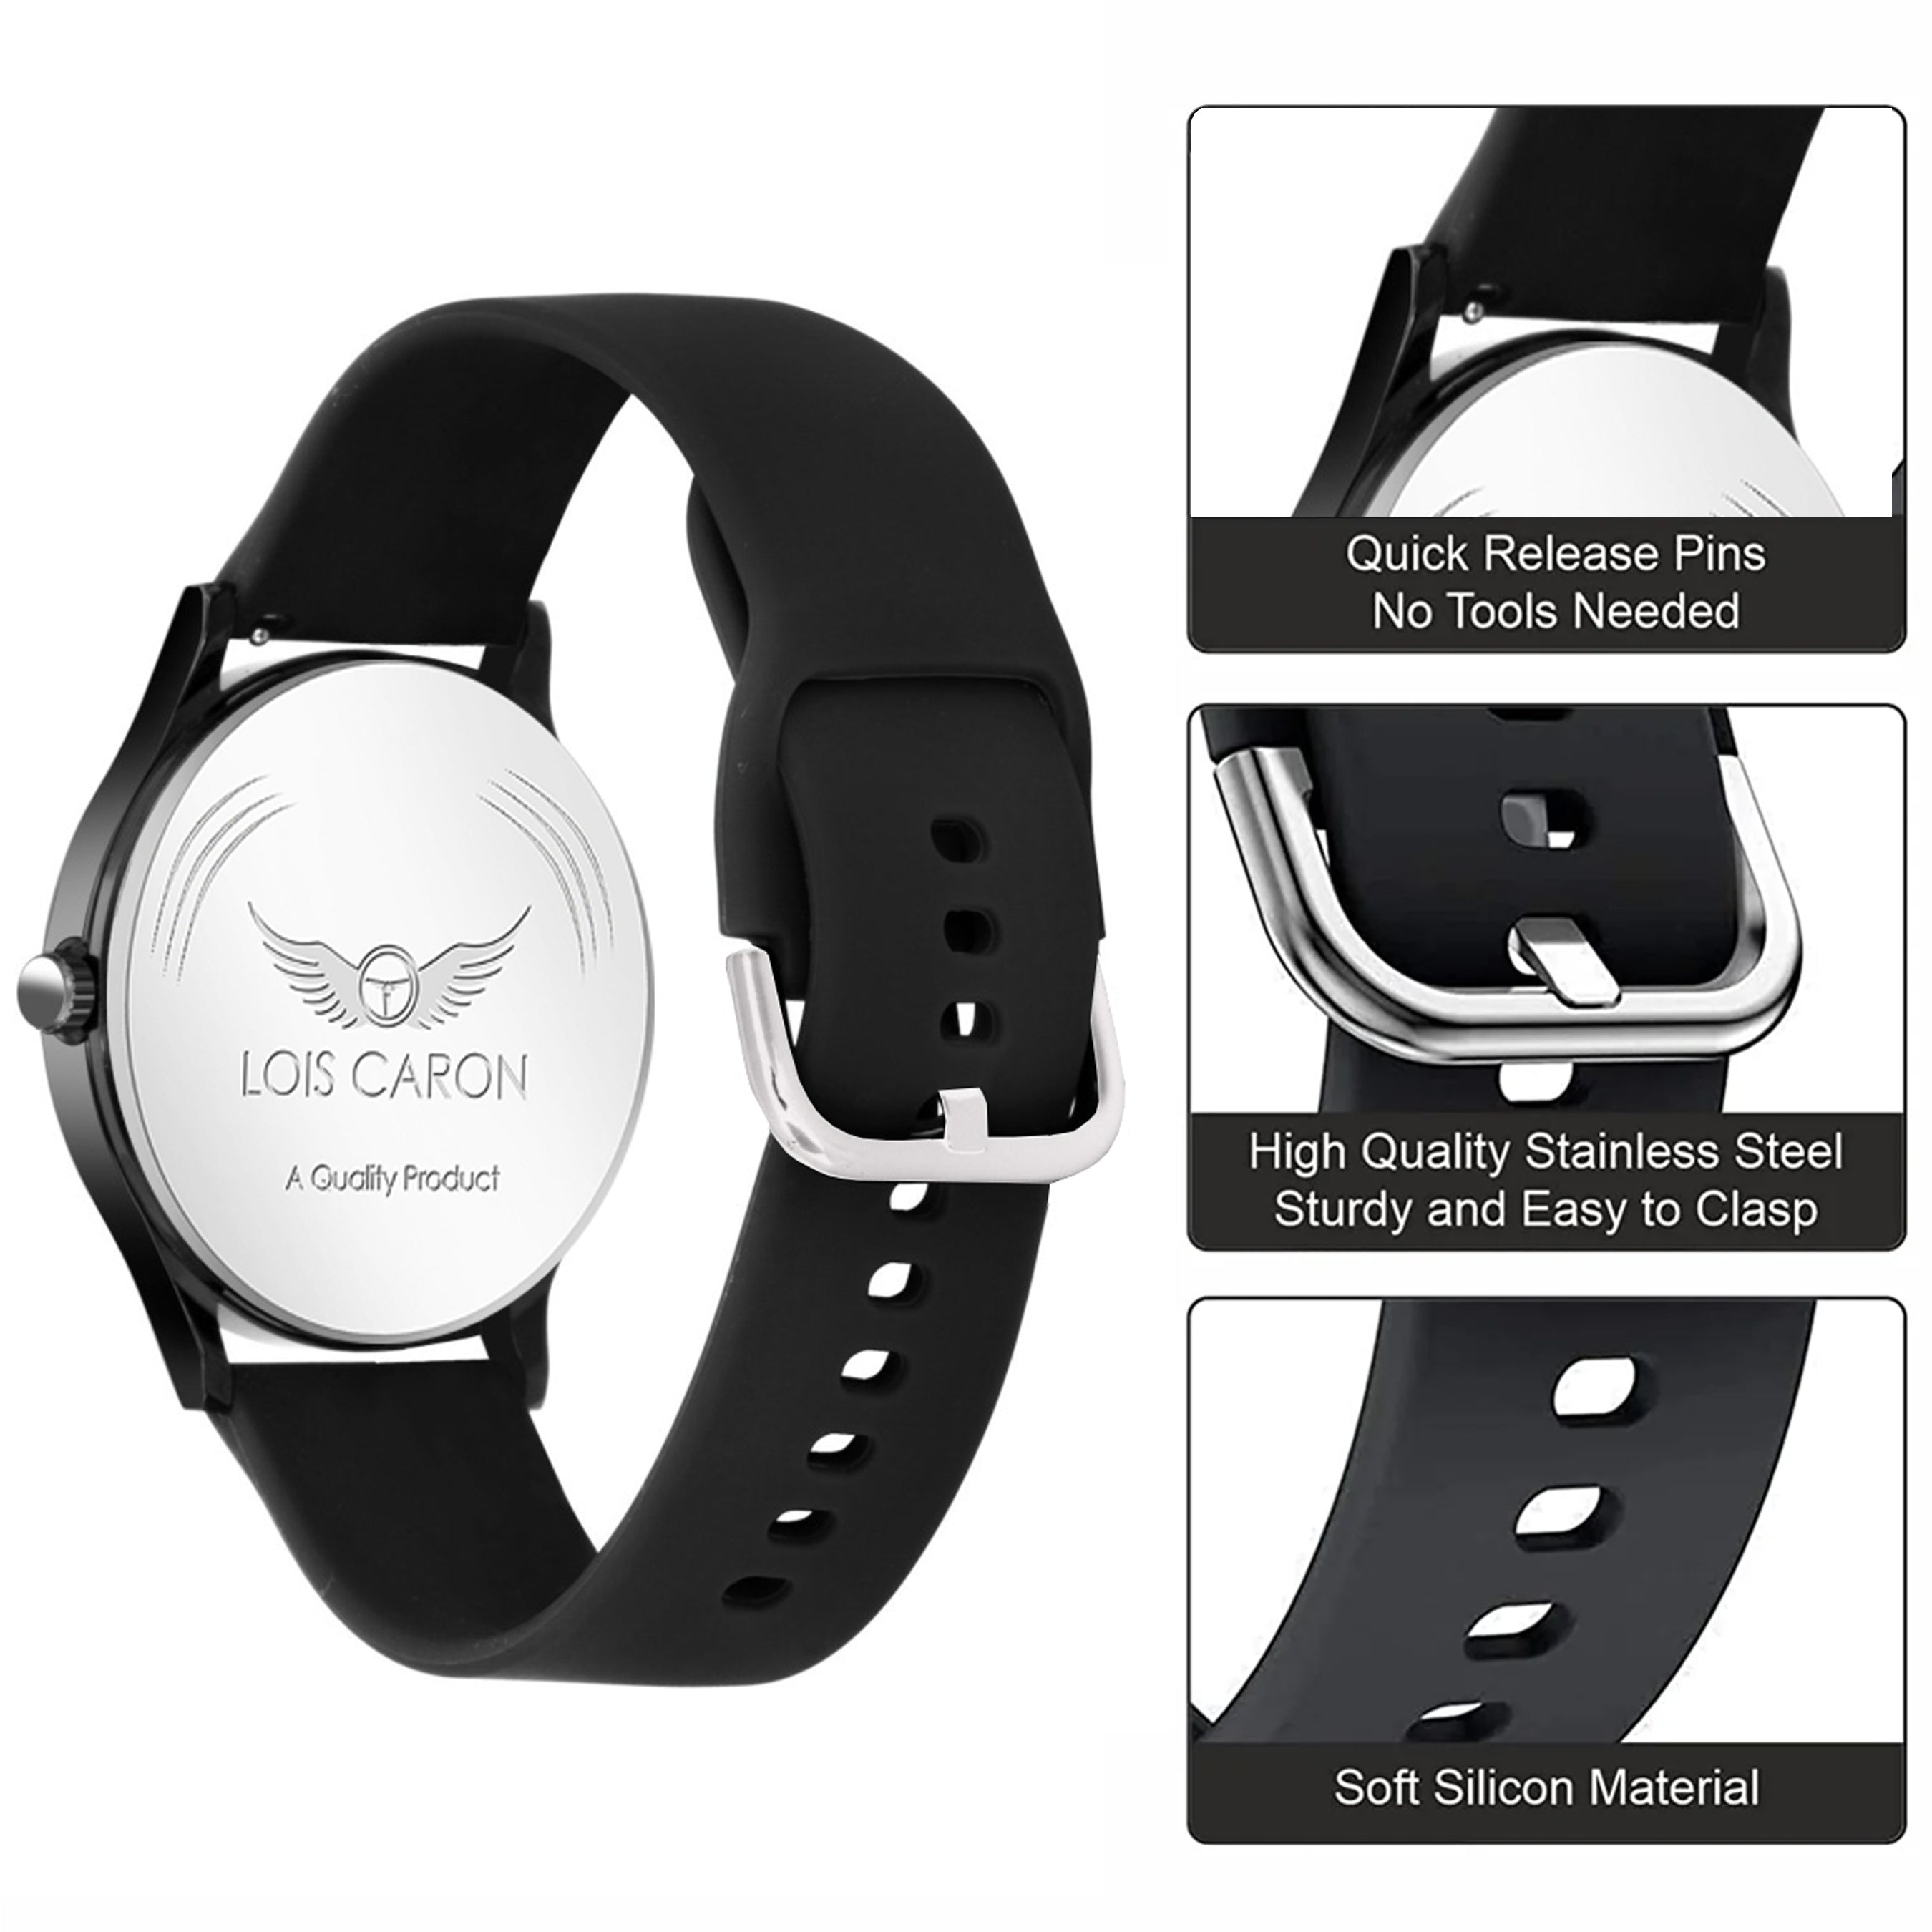 Long Lasting Black Platting With Slim Case and High Quality Silicon Strap Boys Analog Watch - For Men LCS-8806